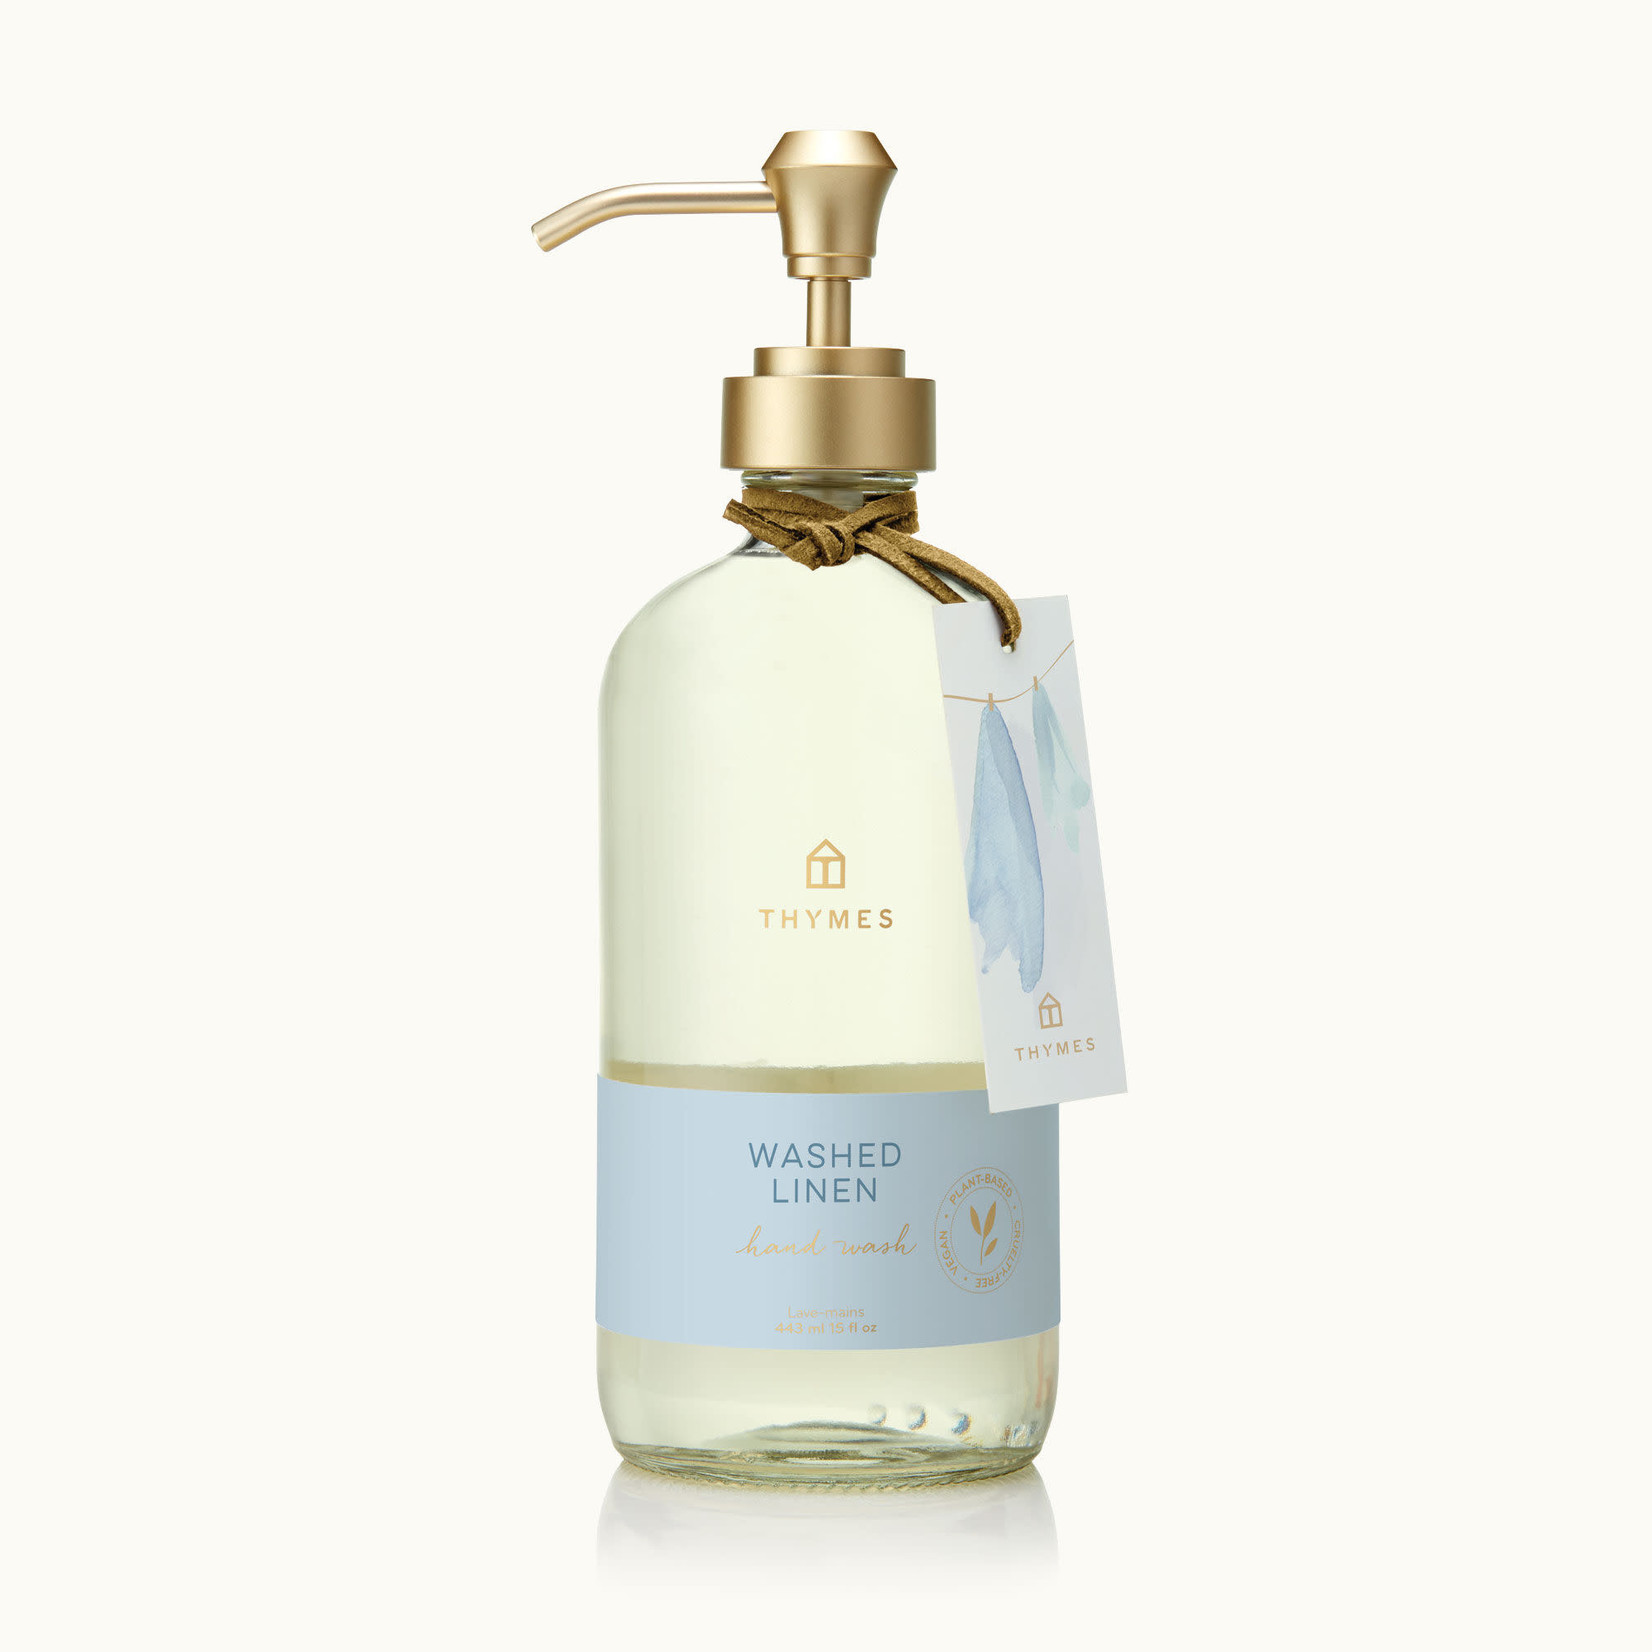 Thymes Thymes Washed Linen Large Hand Wash